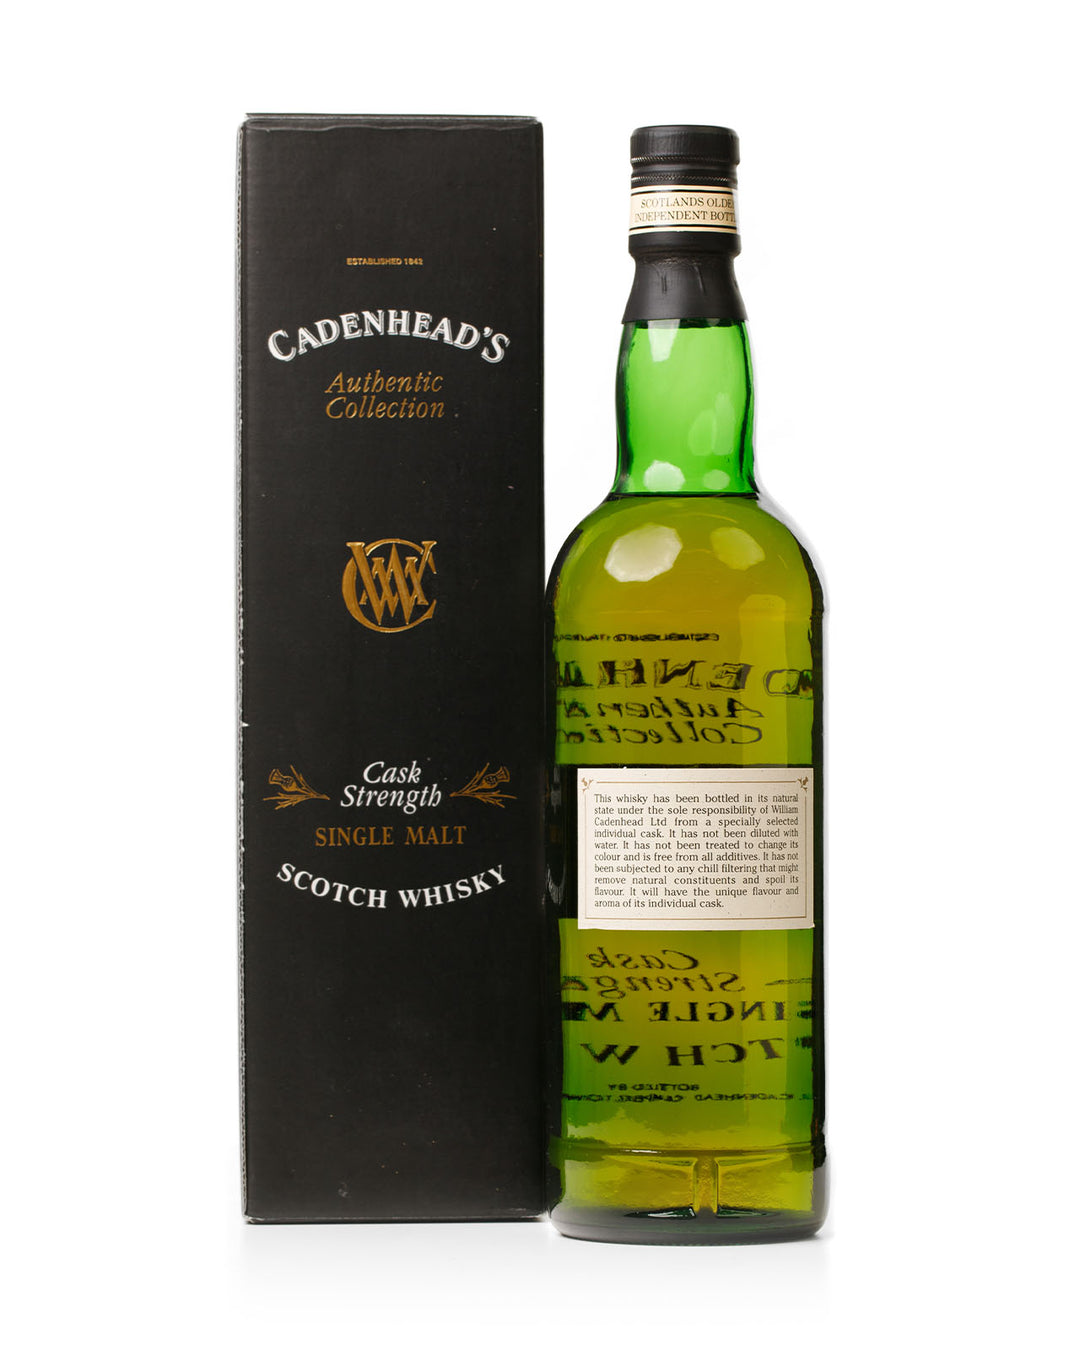 Convalmore-Glenlivet 1977 20 Year Old Cadenheads Authentic Collection With Original Box